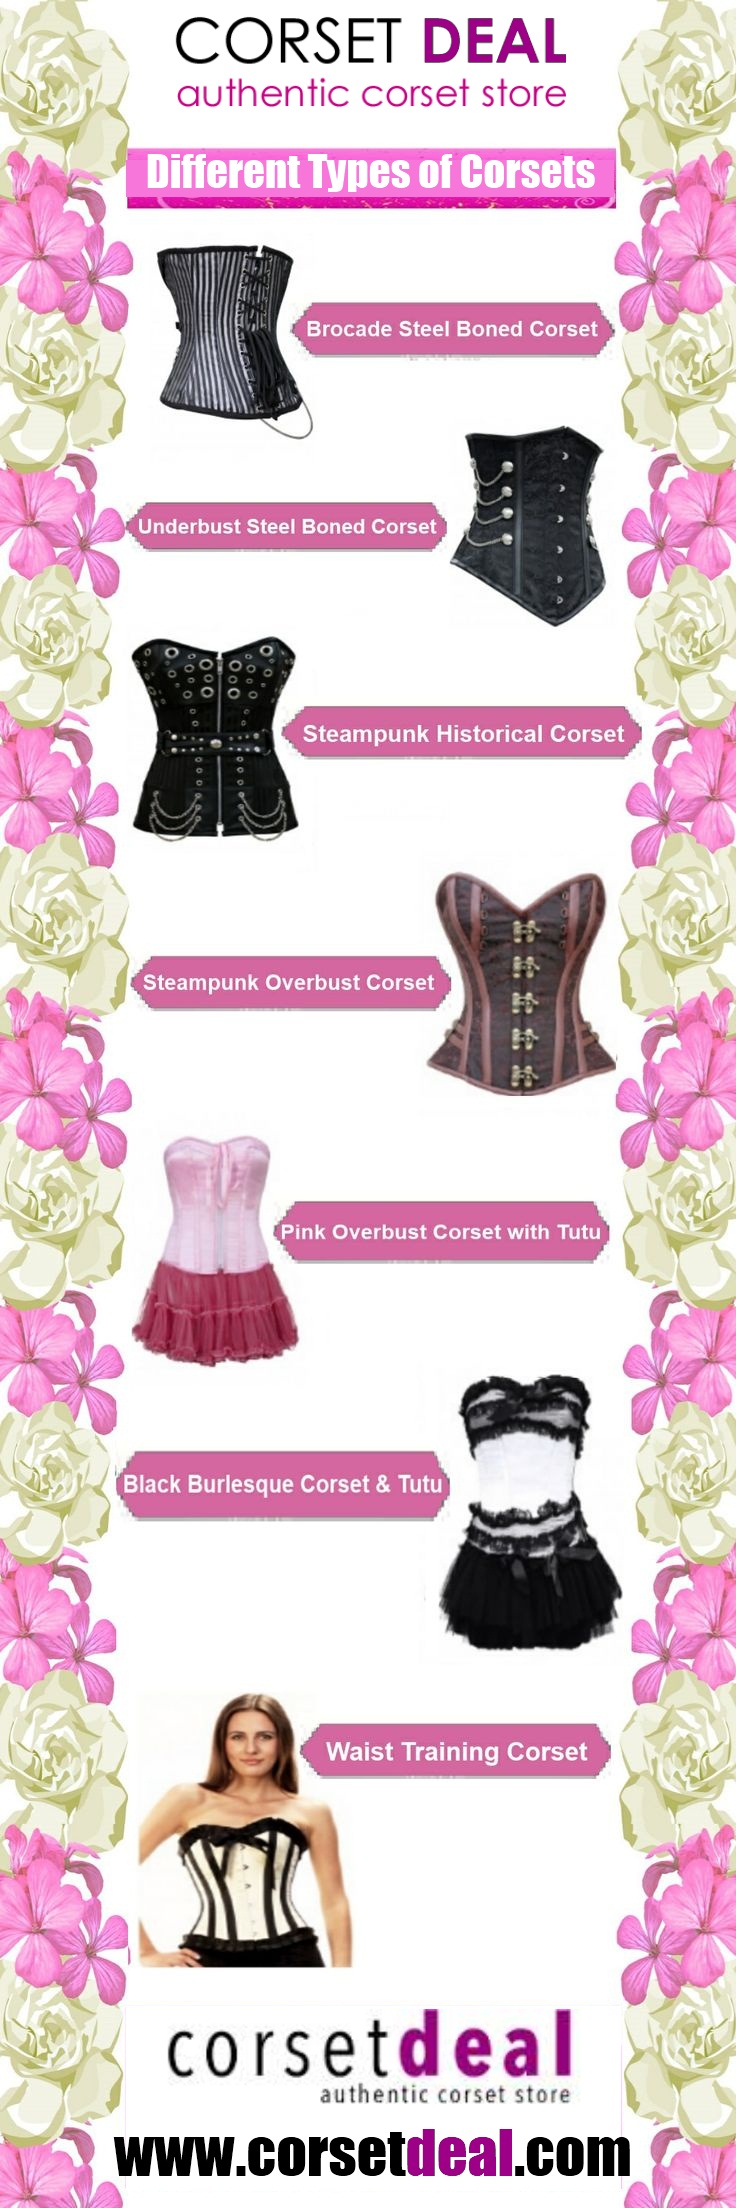 Different Types of Corsets 